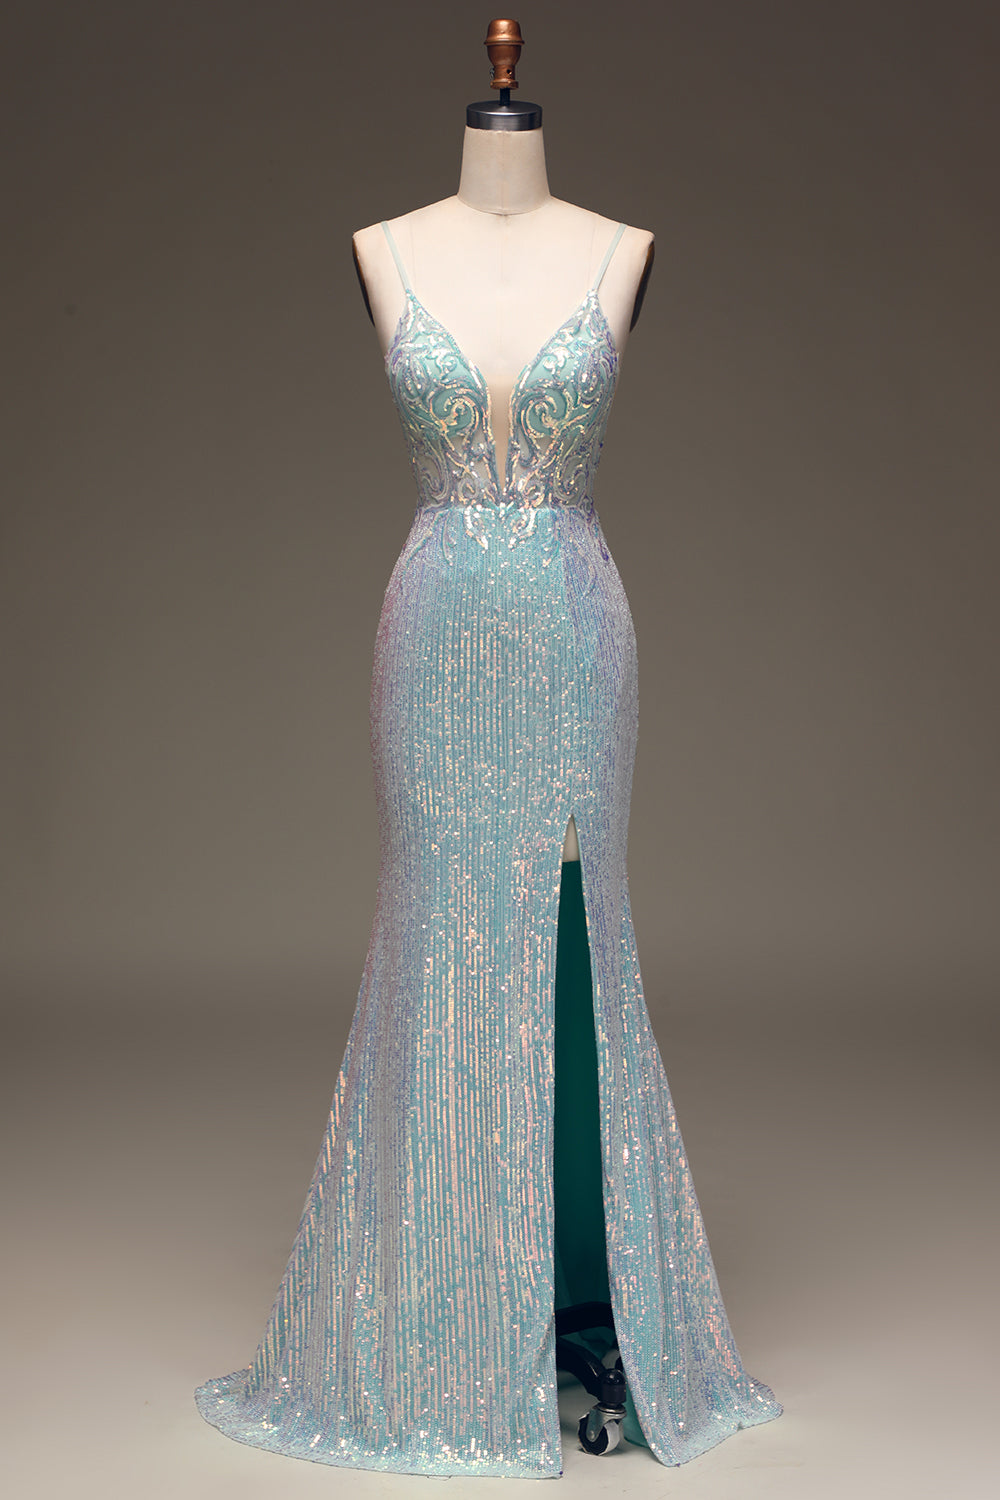 Sequins Sparkly Mermaid Prom Dress with Slit